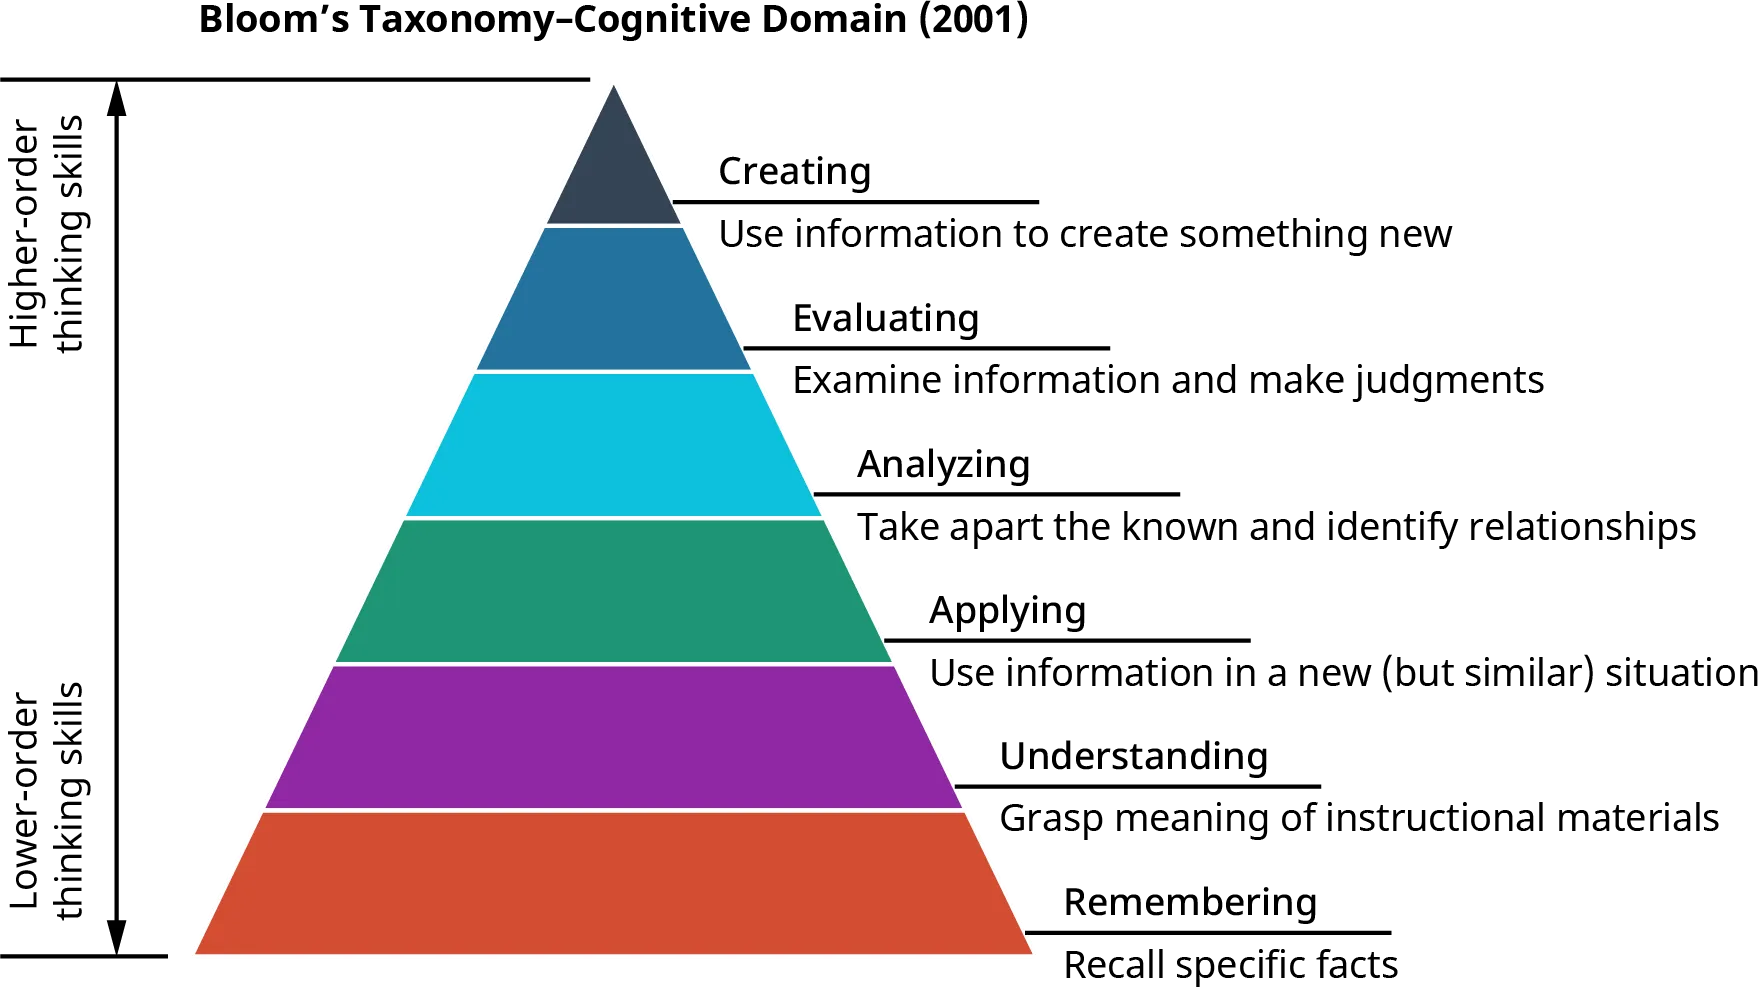 A shape is divided into six colored portions. Toward the bottom are “Lower Order Thinking Skills,” and toward the top are Higher Order Thinking Skills. From bottom to top, the portions are Remembering, Understanding, Applying, Analyzing, Evaluating, and Creating.